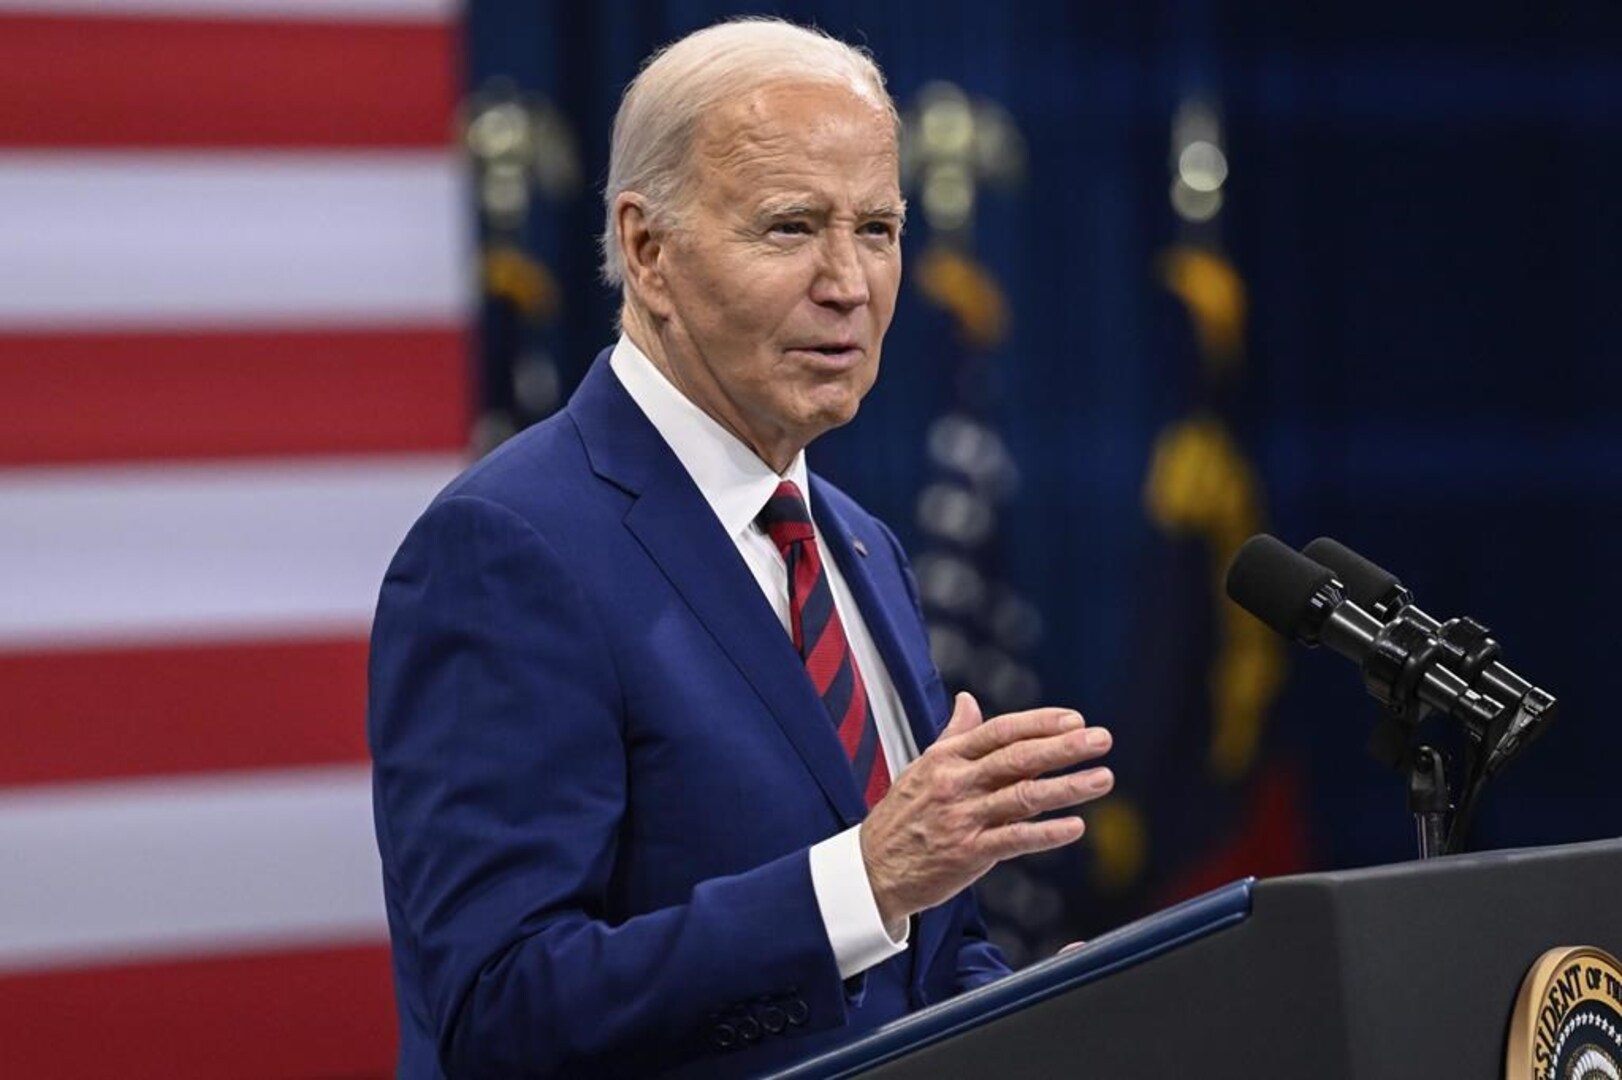 Calls grow for Biden to step aside